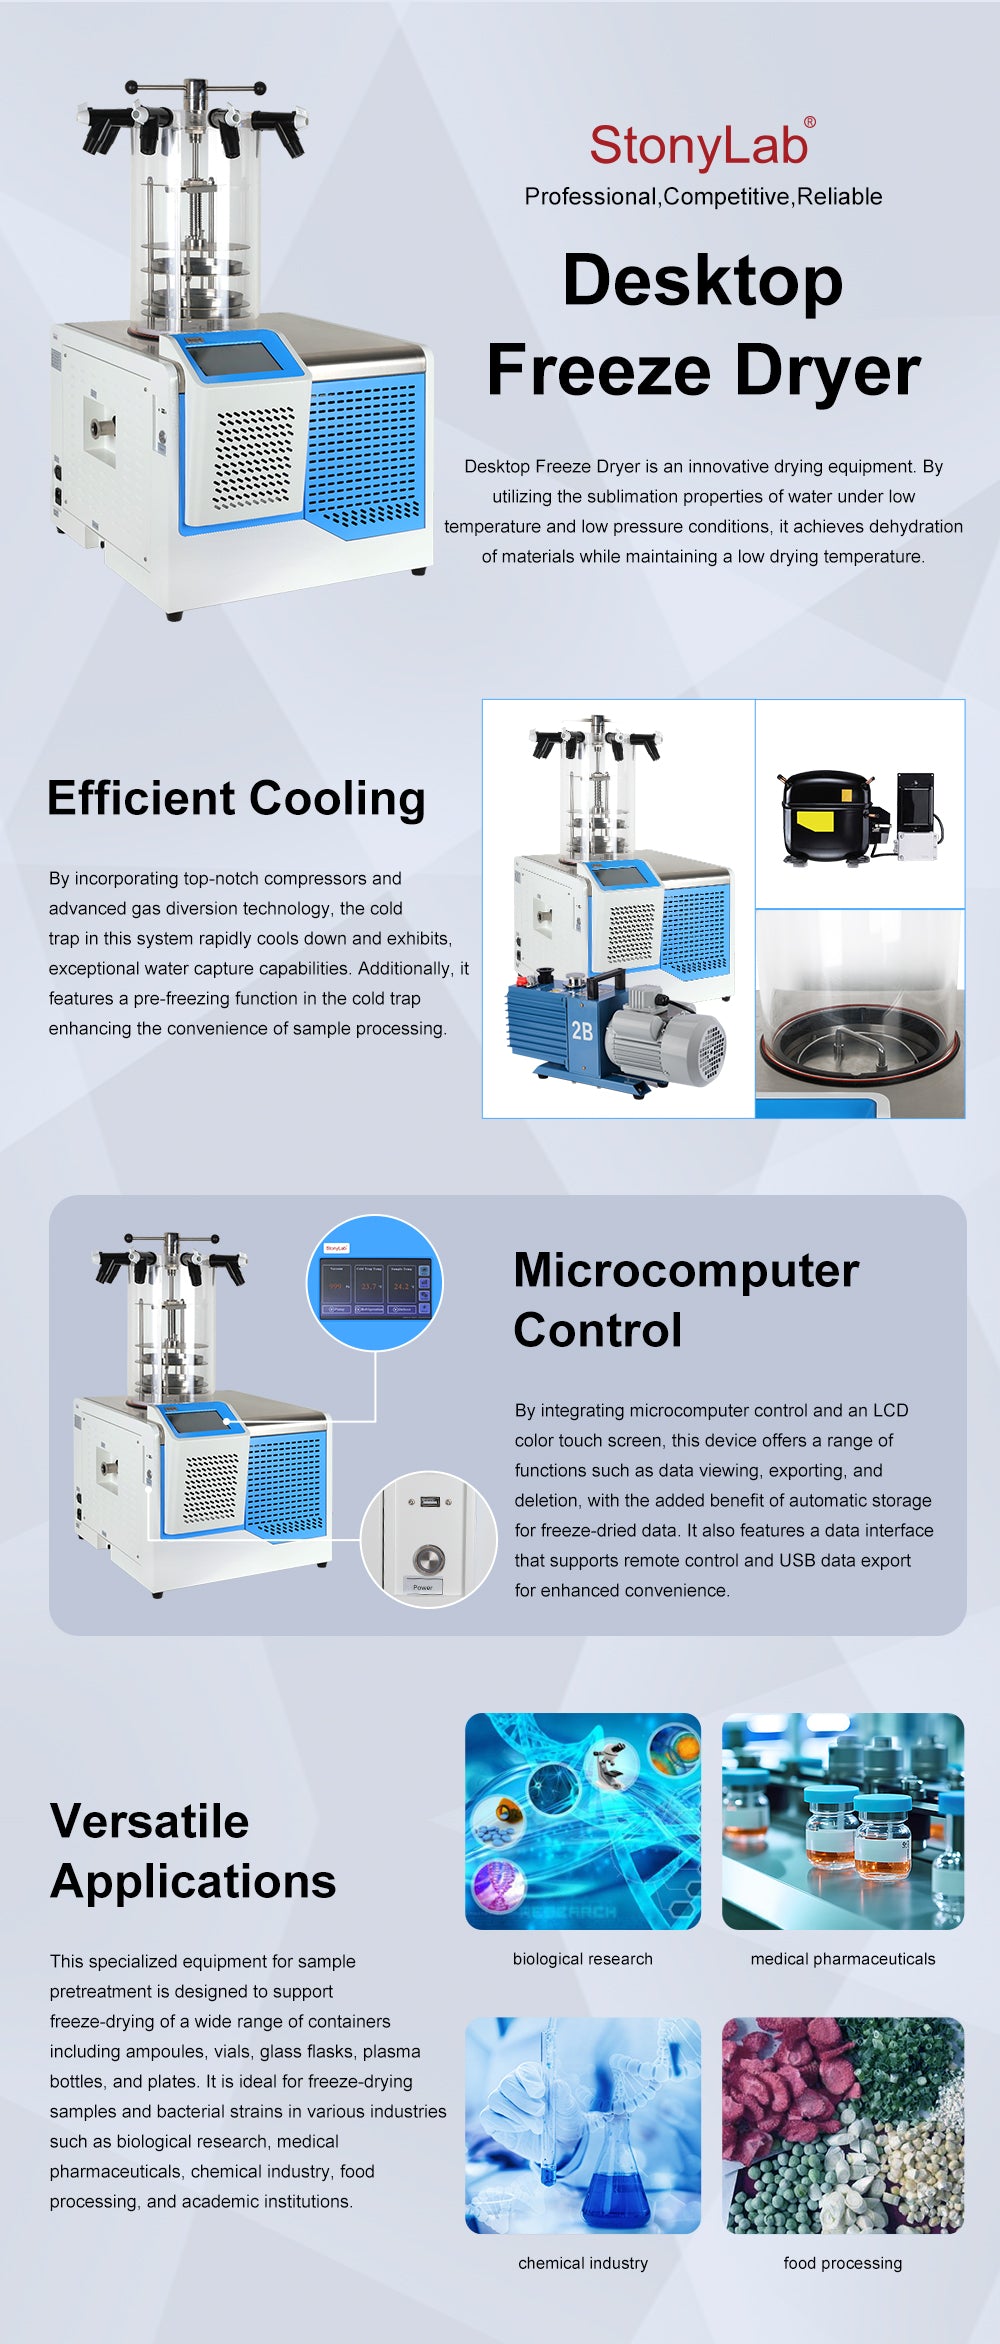 Get Great Deals Shopping for vial lyophilization machine 